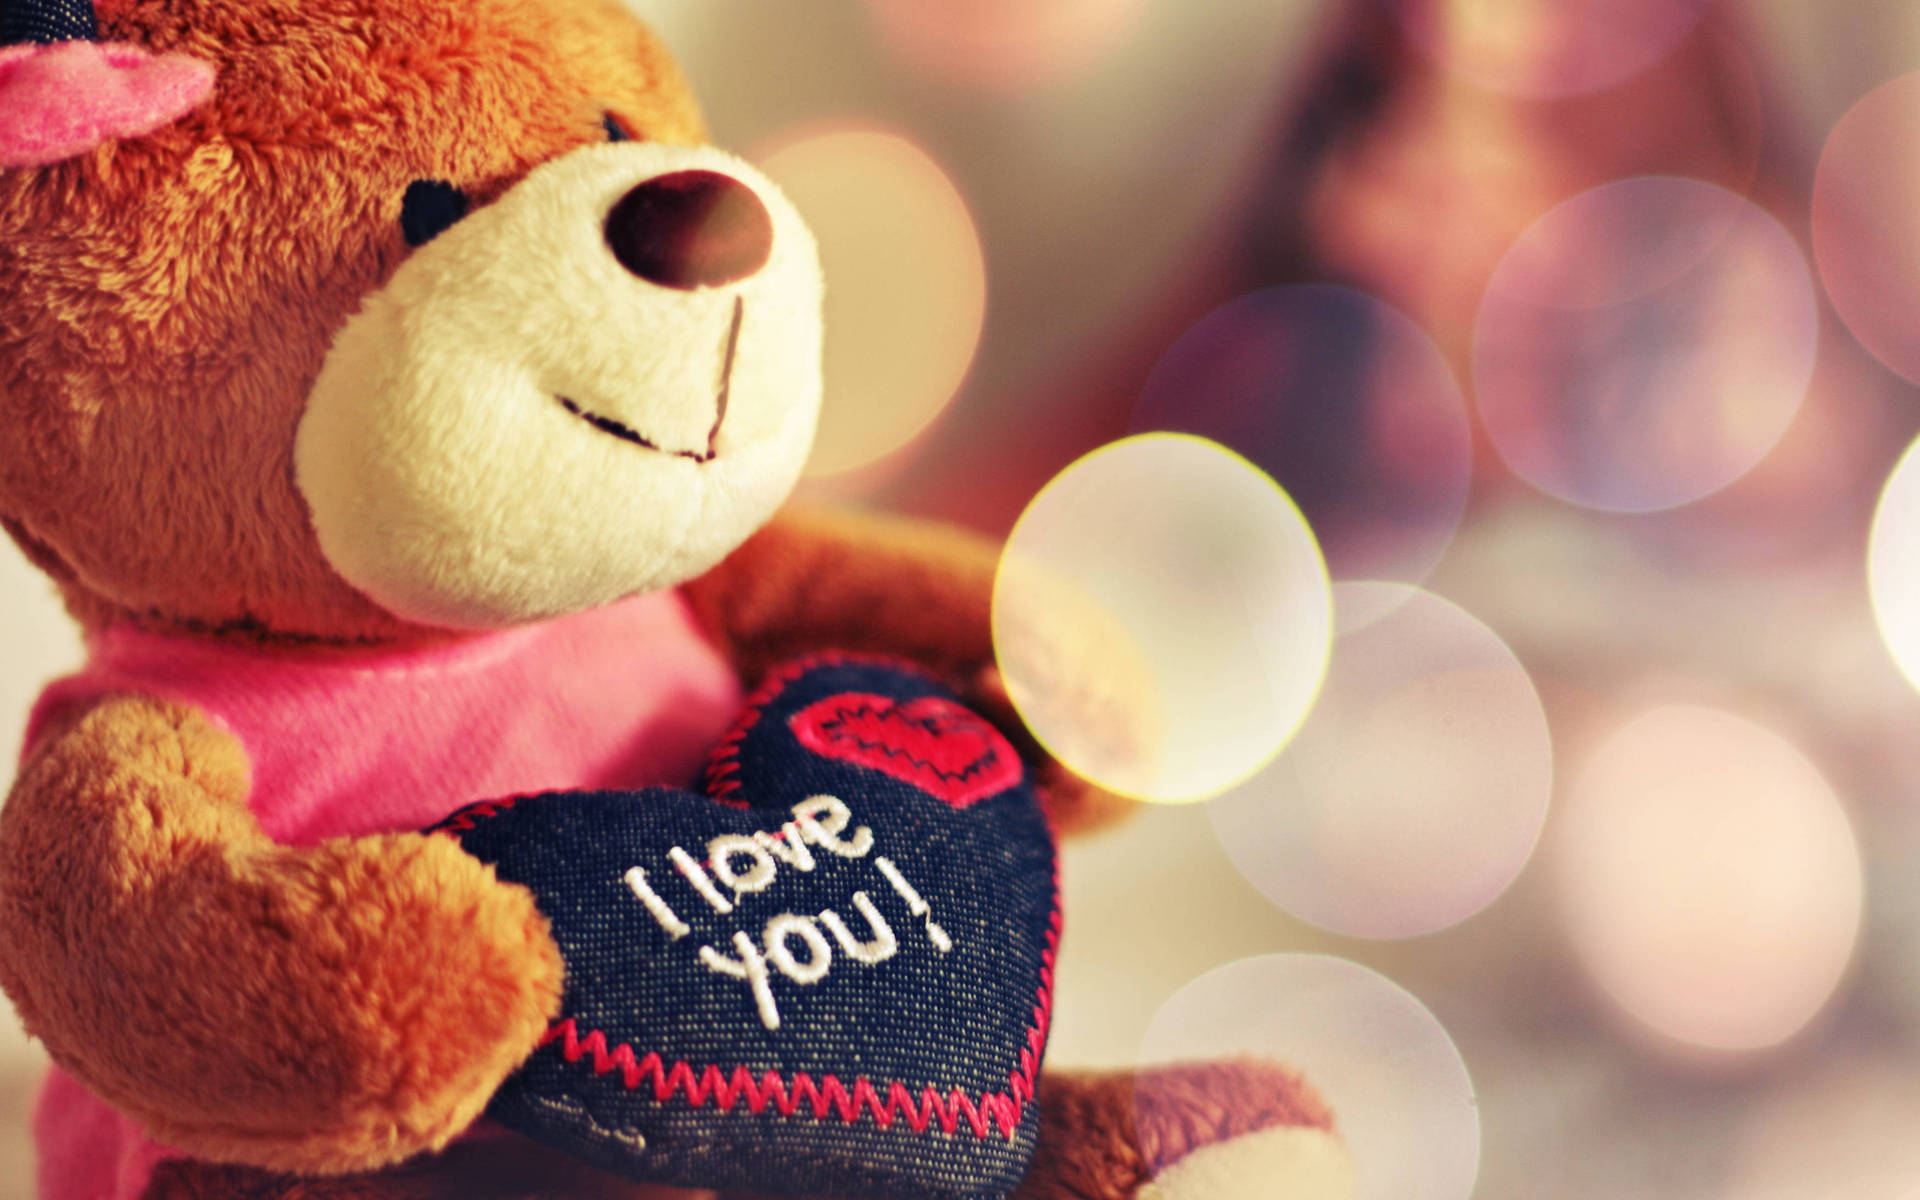 Show Your Love With A Teddy Bear. Background